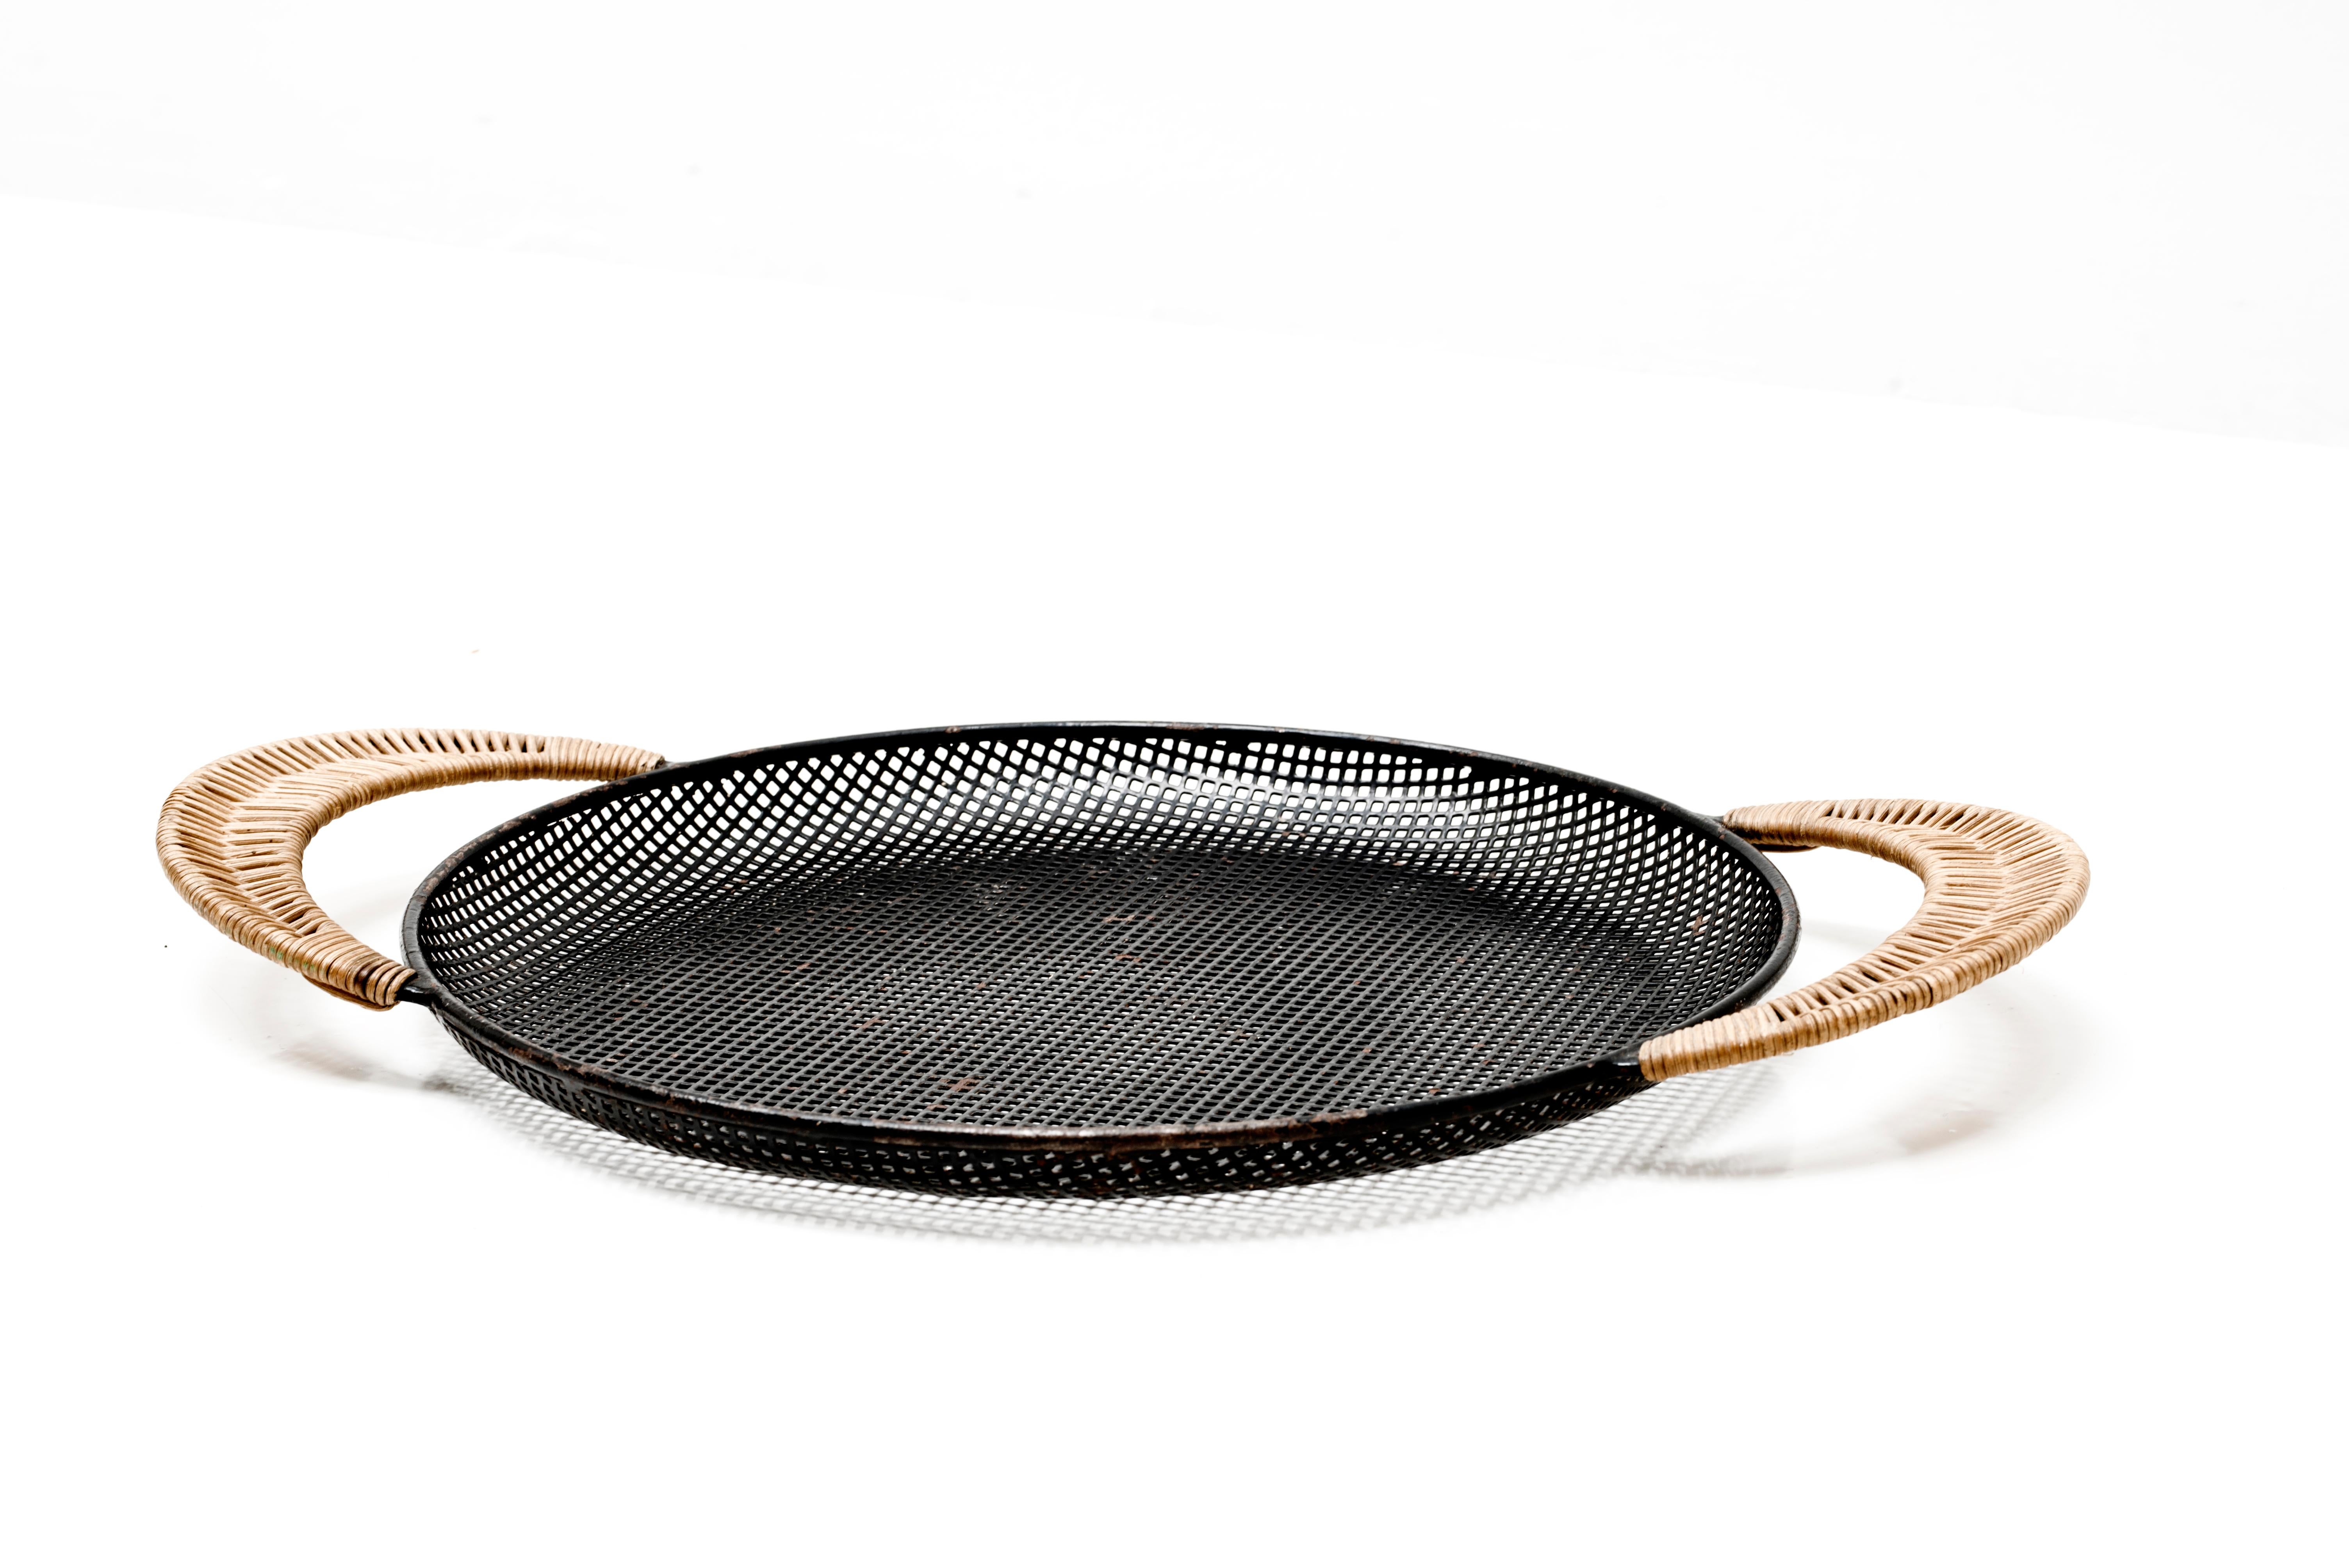 Round tray in black lacquered perforated metal and rattan.
Designed by Mathieu Matégot and manufactured in Ateliers Matégot,
circa 1950, France.